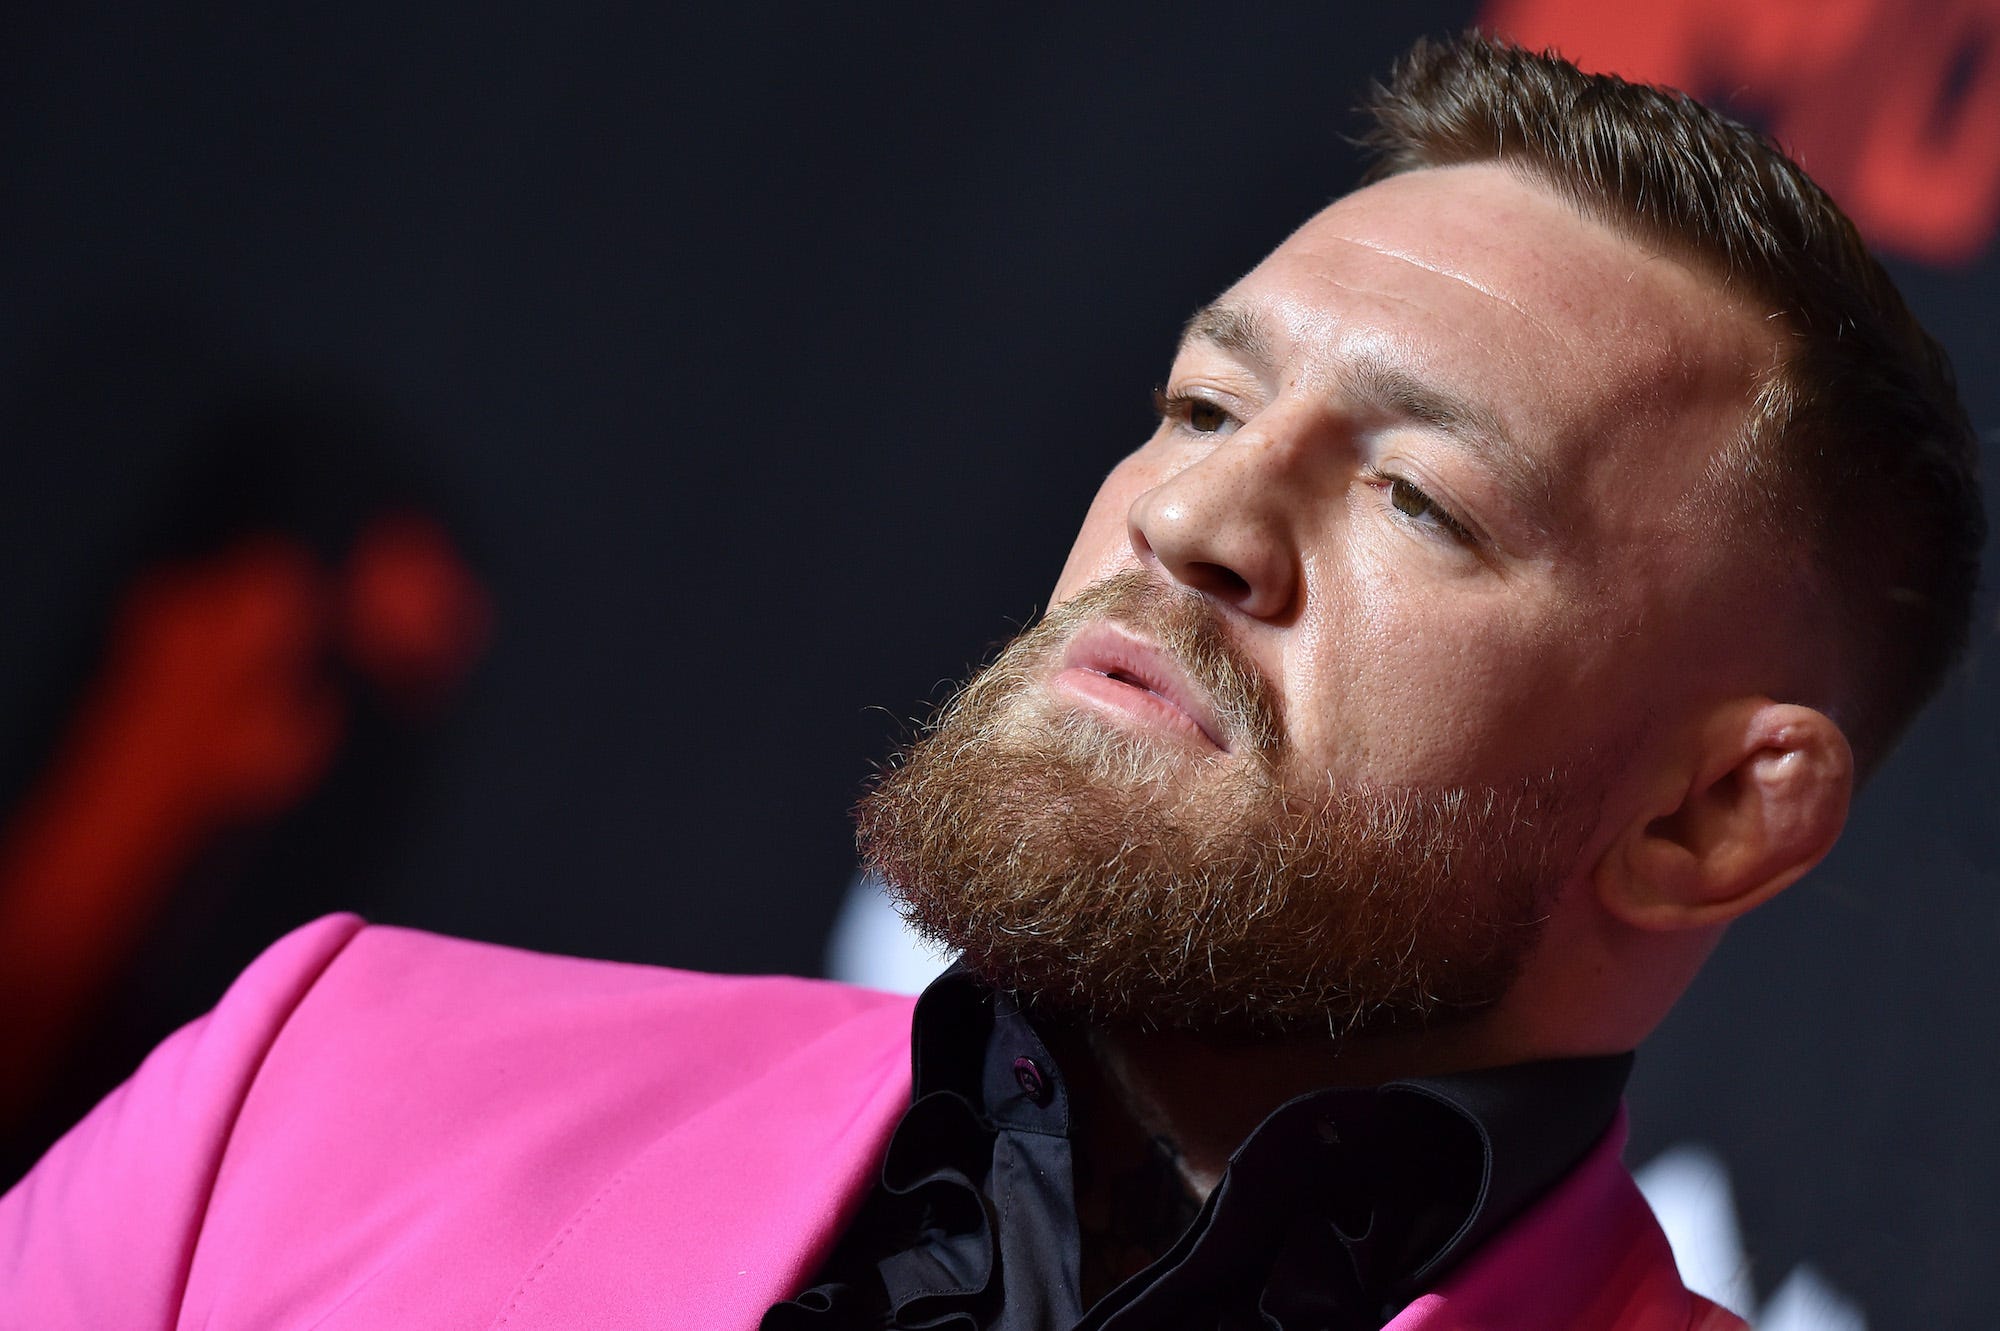 Conor McGregor in a pink suit jacket at the VMAs in Brooklyn, New York.